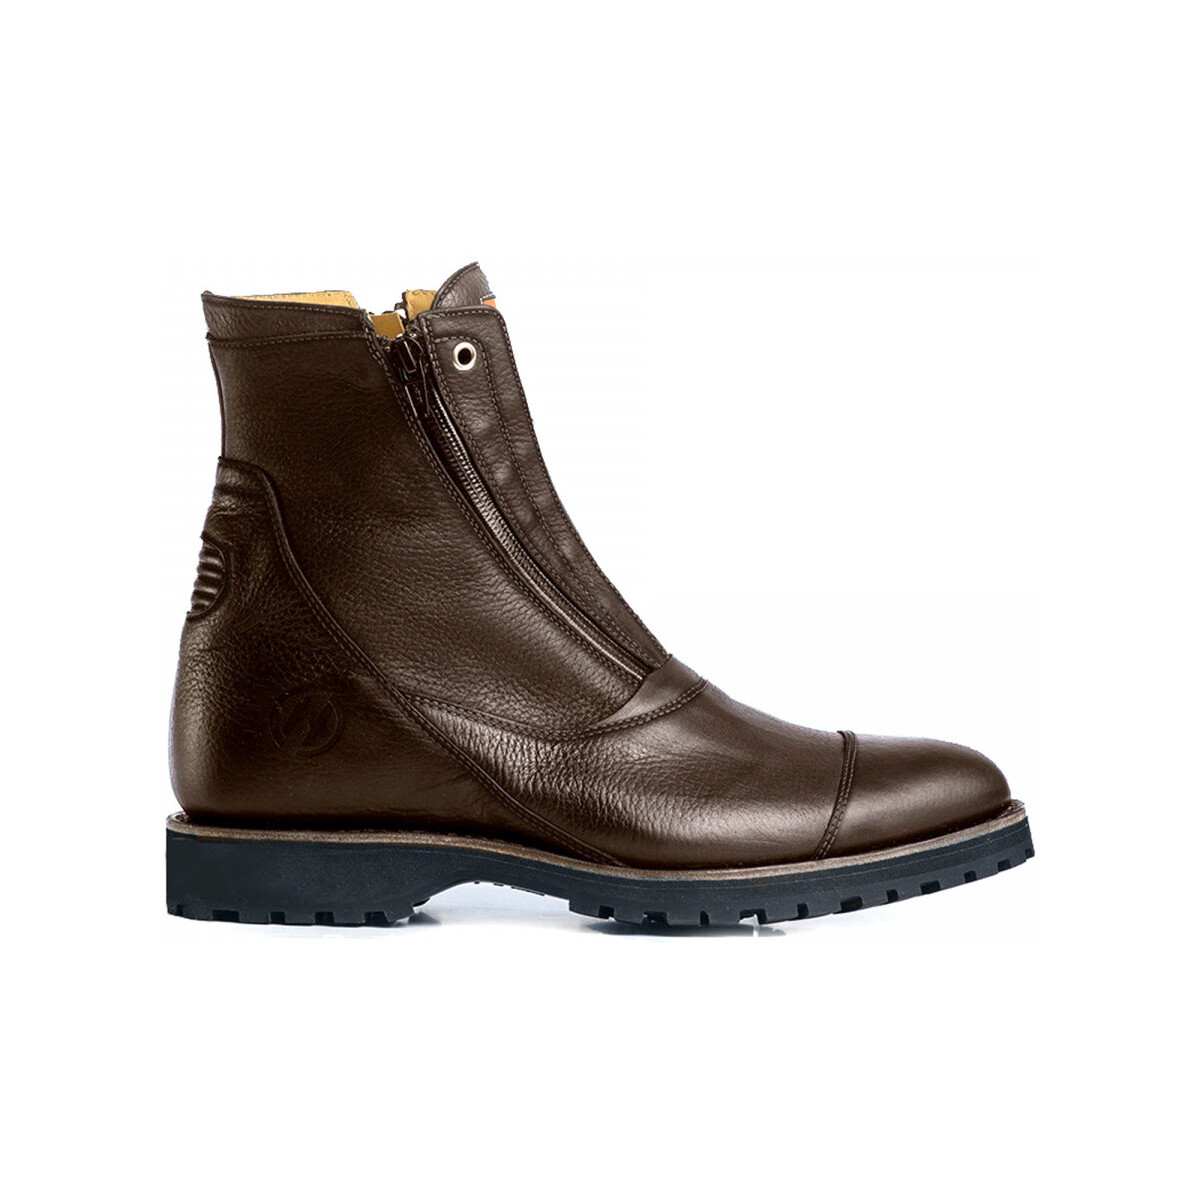 Chaussures Homme Boots Hardrige Rafale Marron